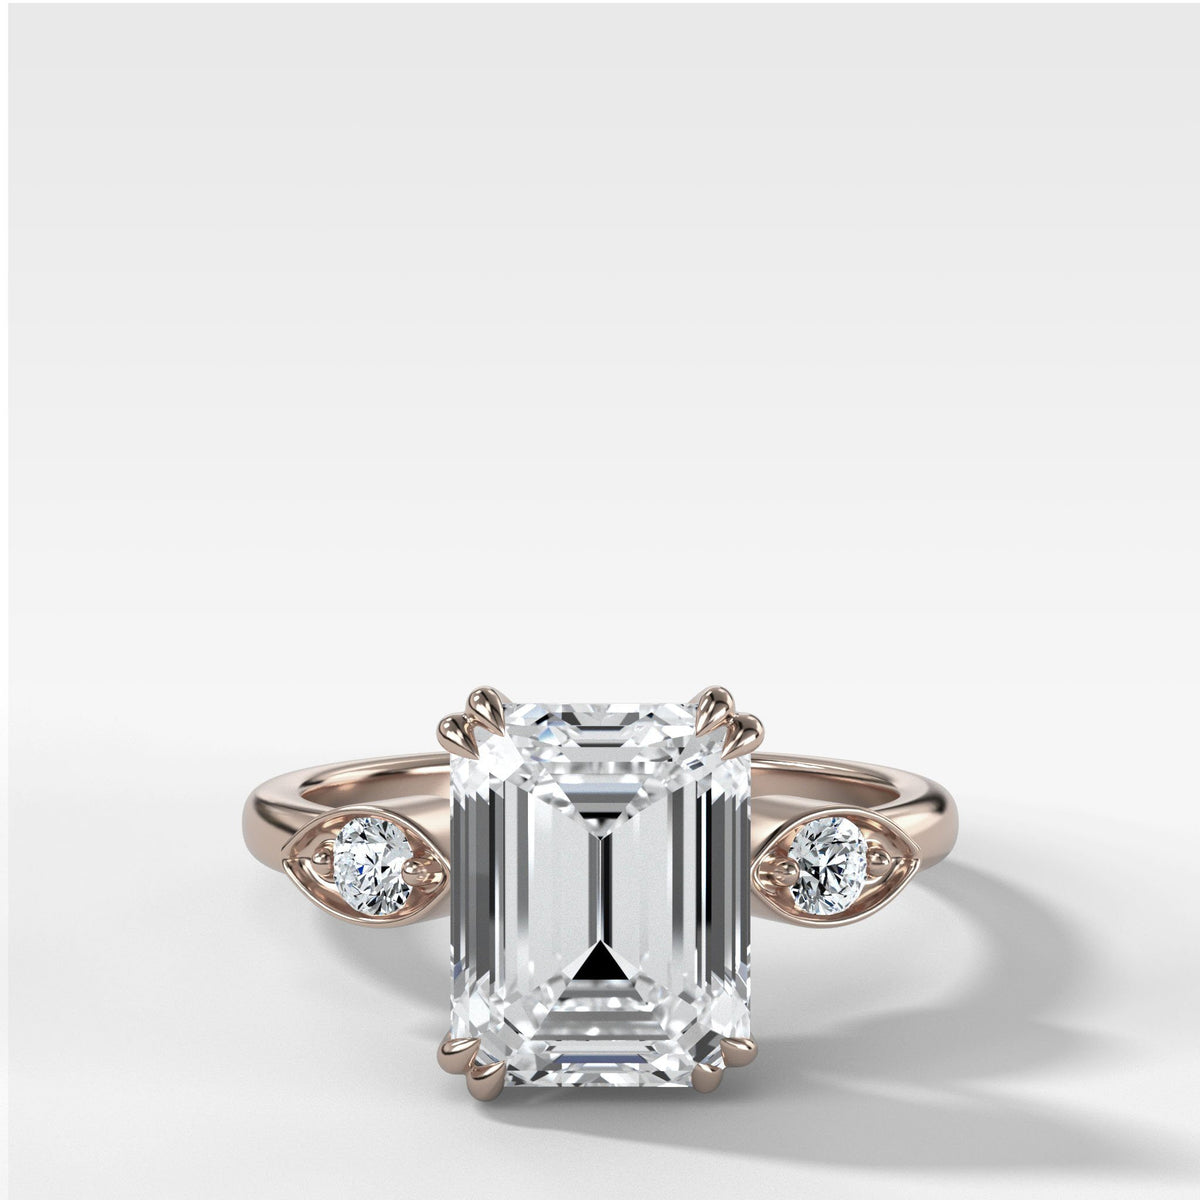 Vintage Ridge Shank Diamond Engagement Ring With Emerald Cut by Good Stone in Rose Gold